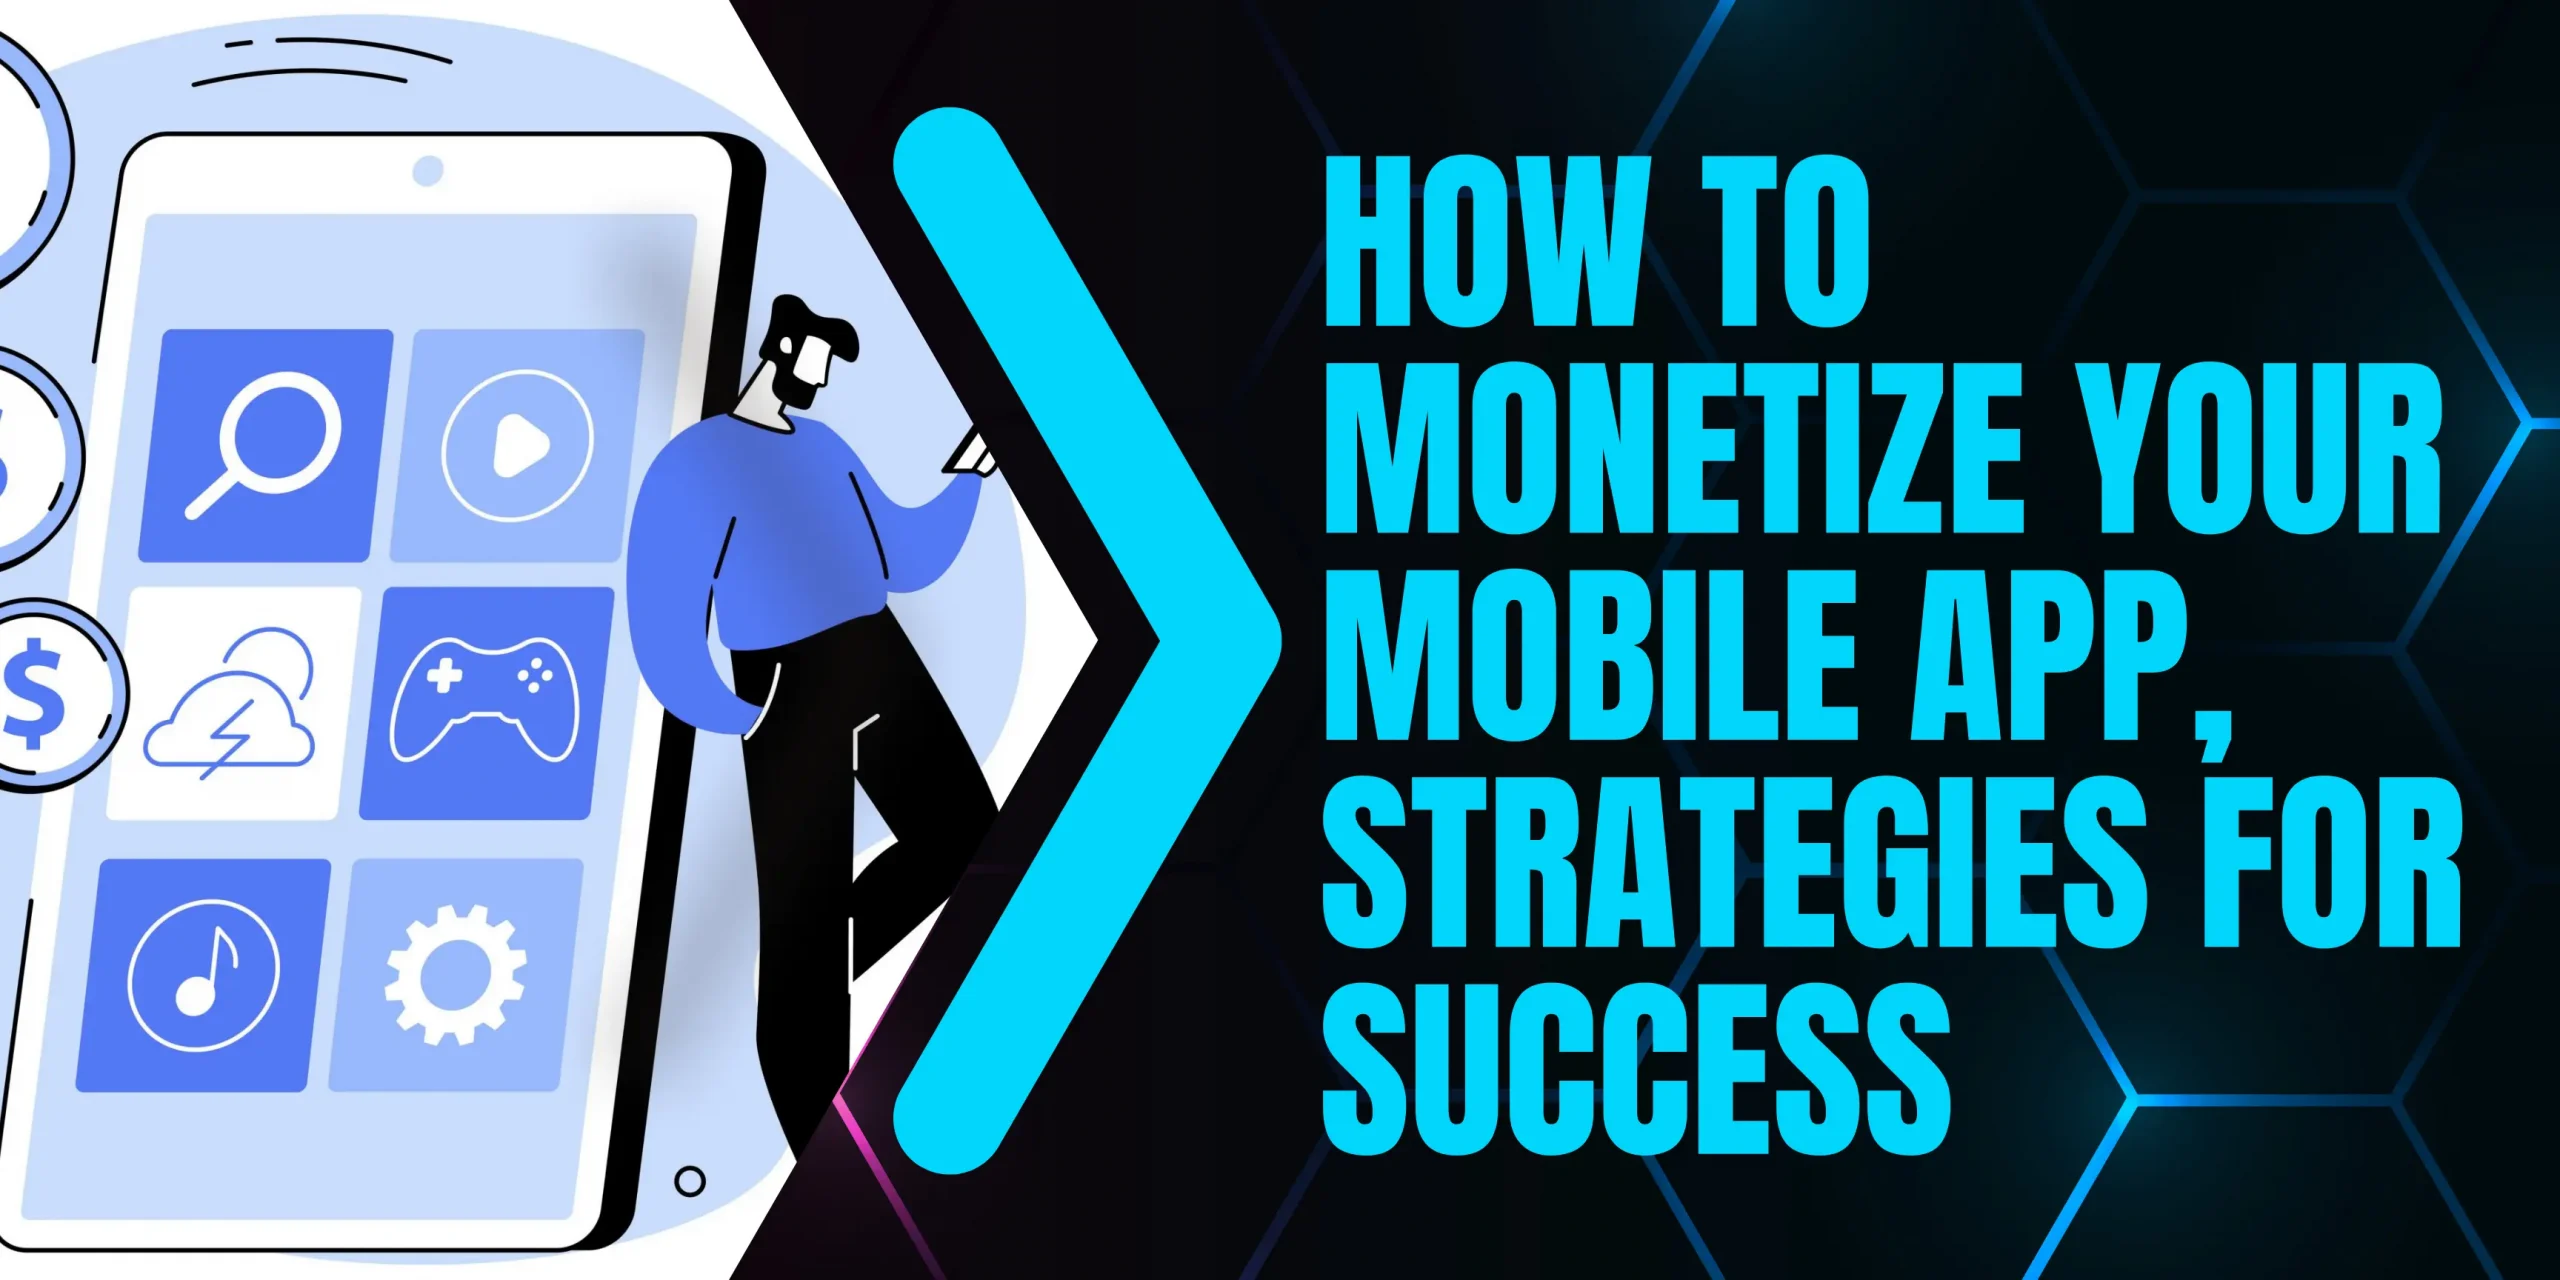 Monetize Your Mobile App, Strategies for Success